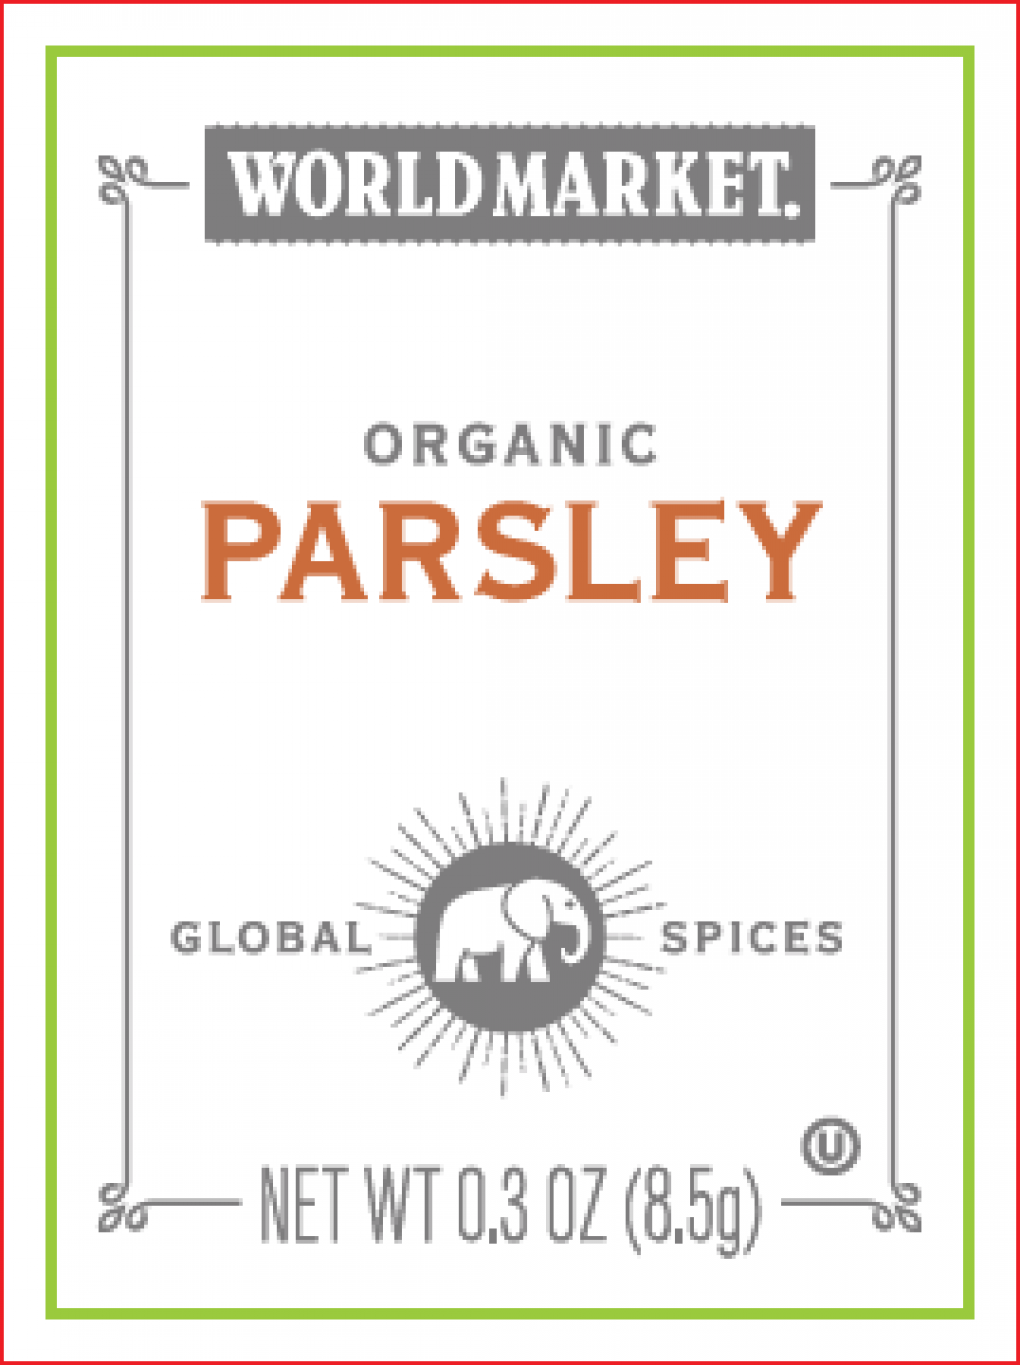 Red Monkey Foods recalled parsley and herbes de provence due to Salmonella